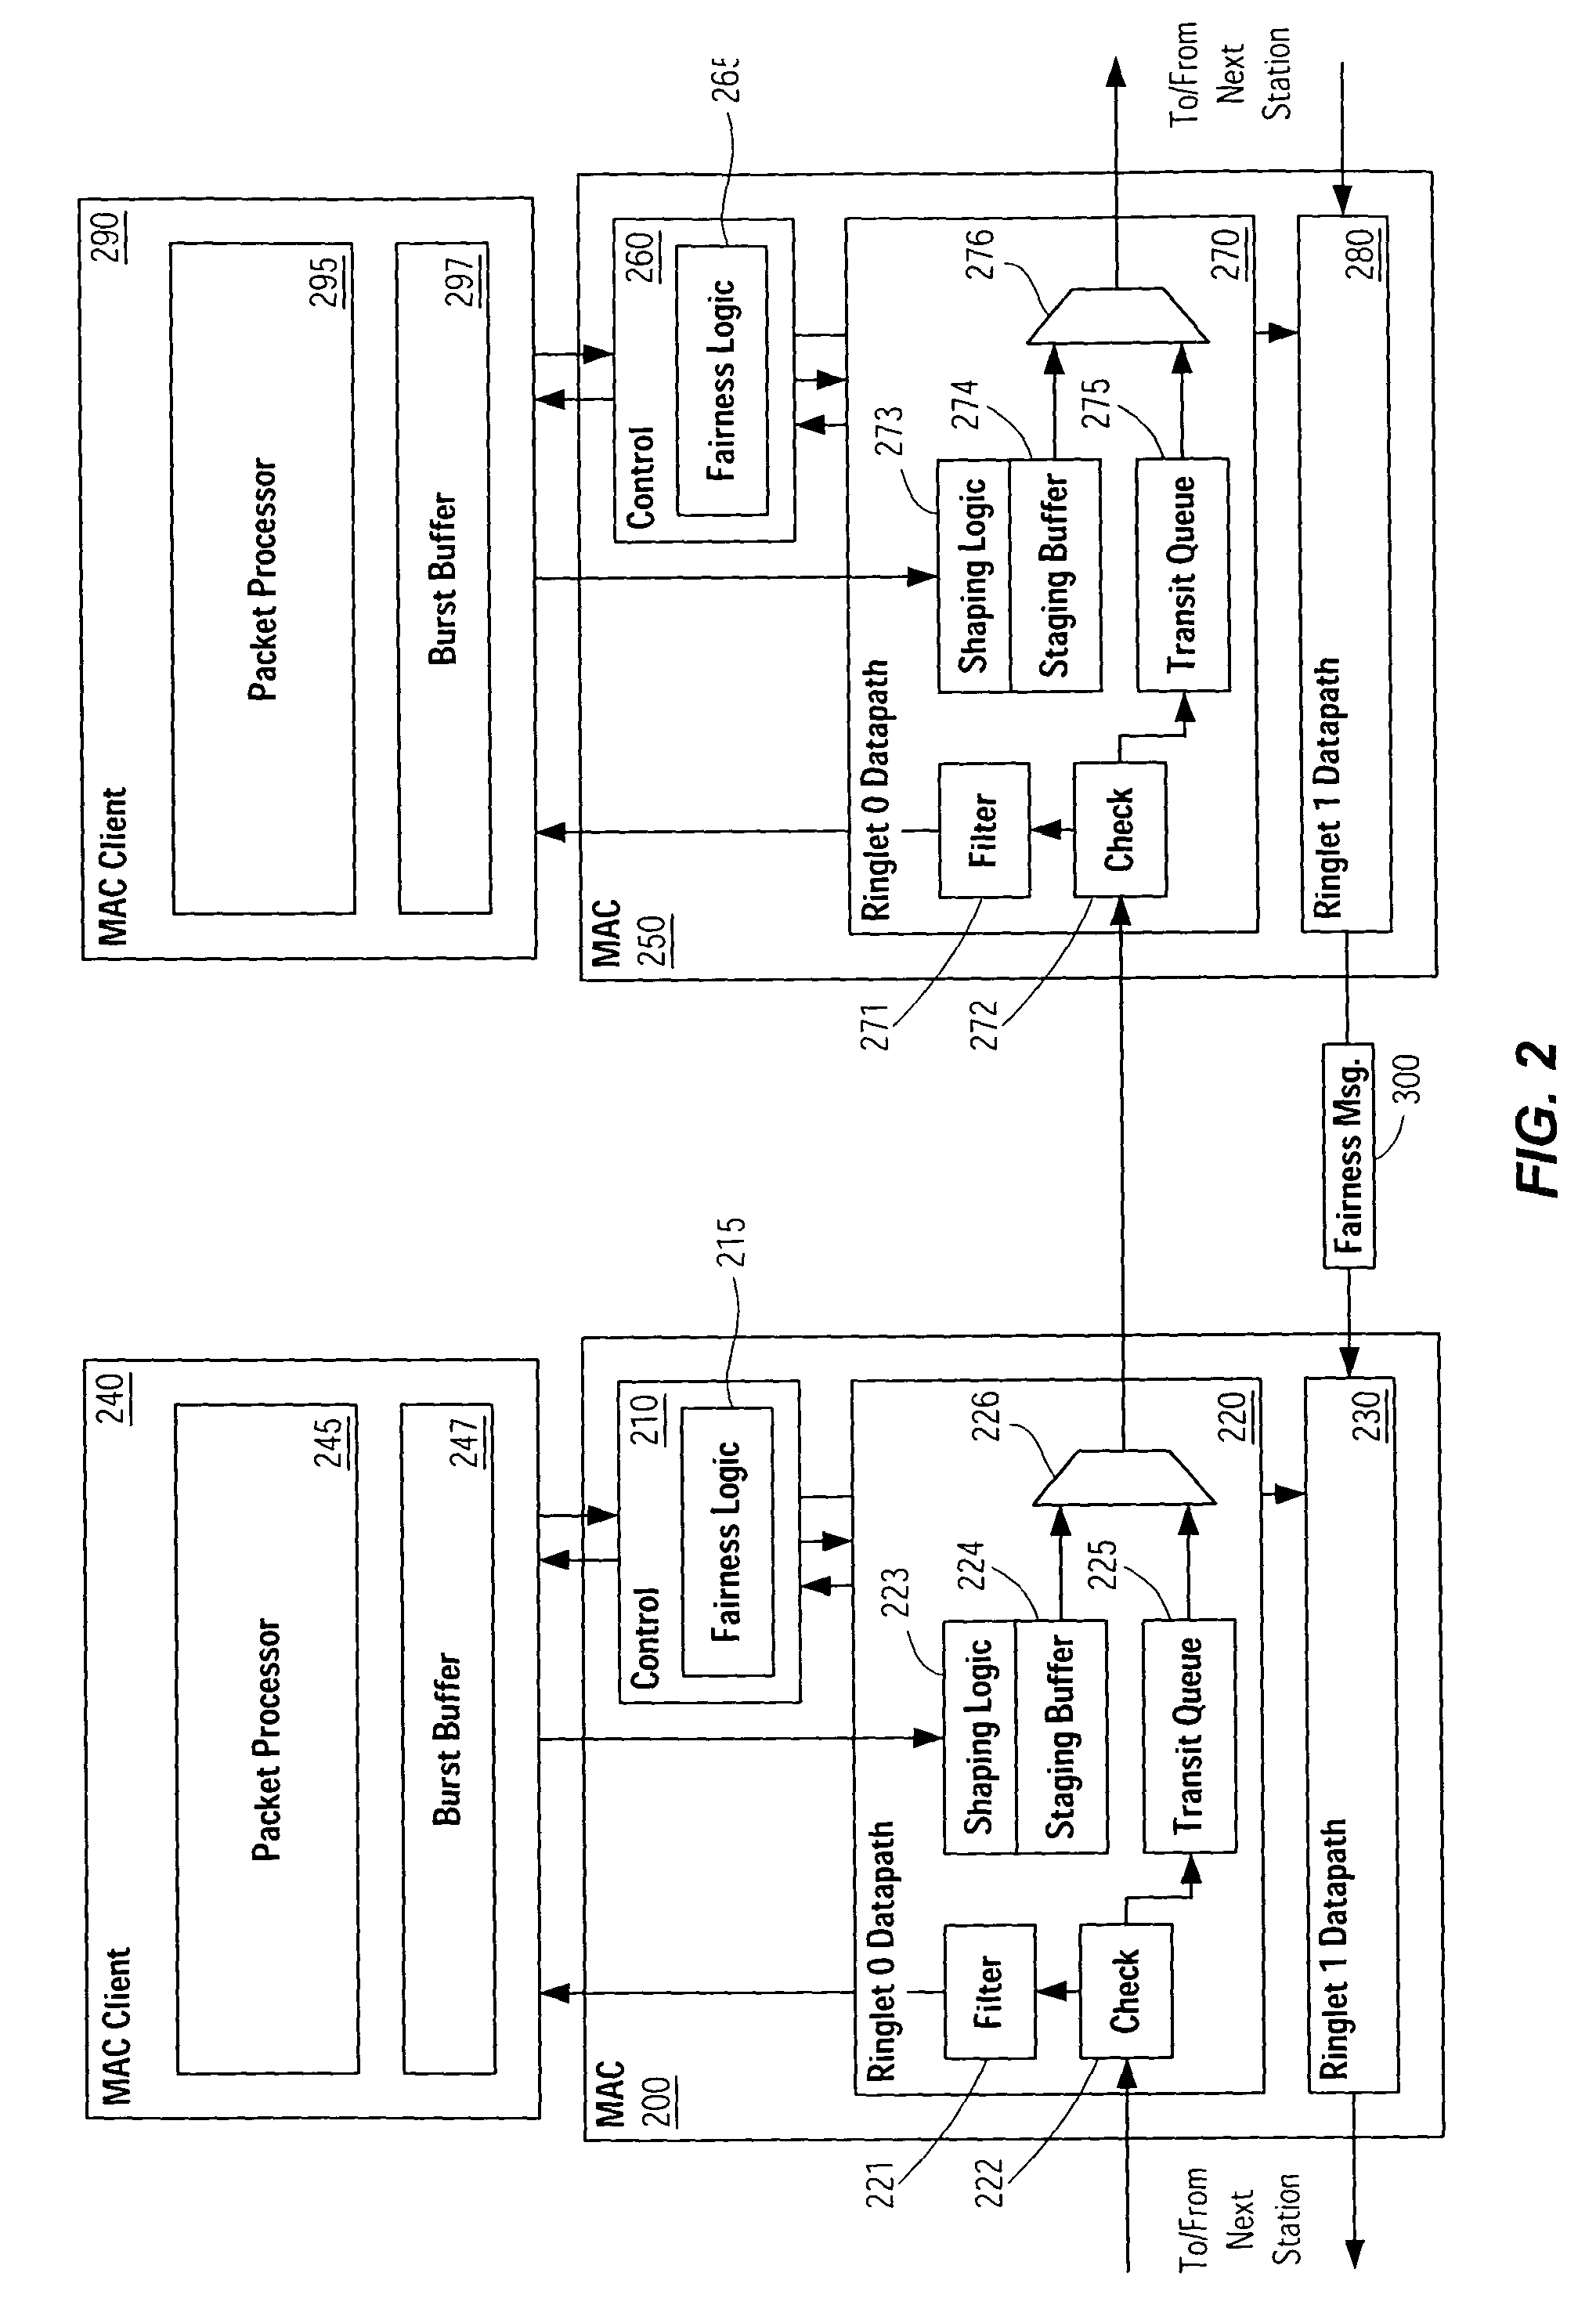 Systems and methods for alleviating client over-subscription in ring networks